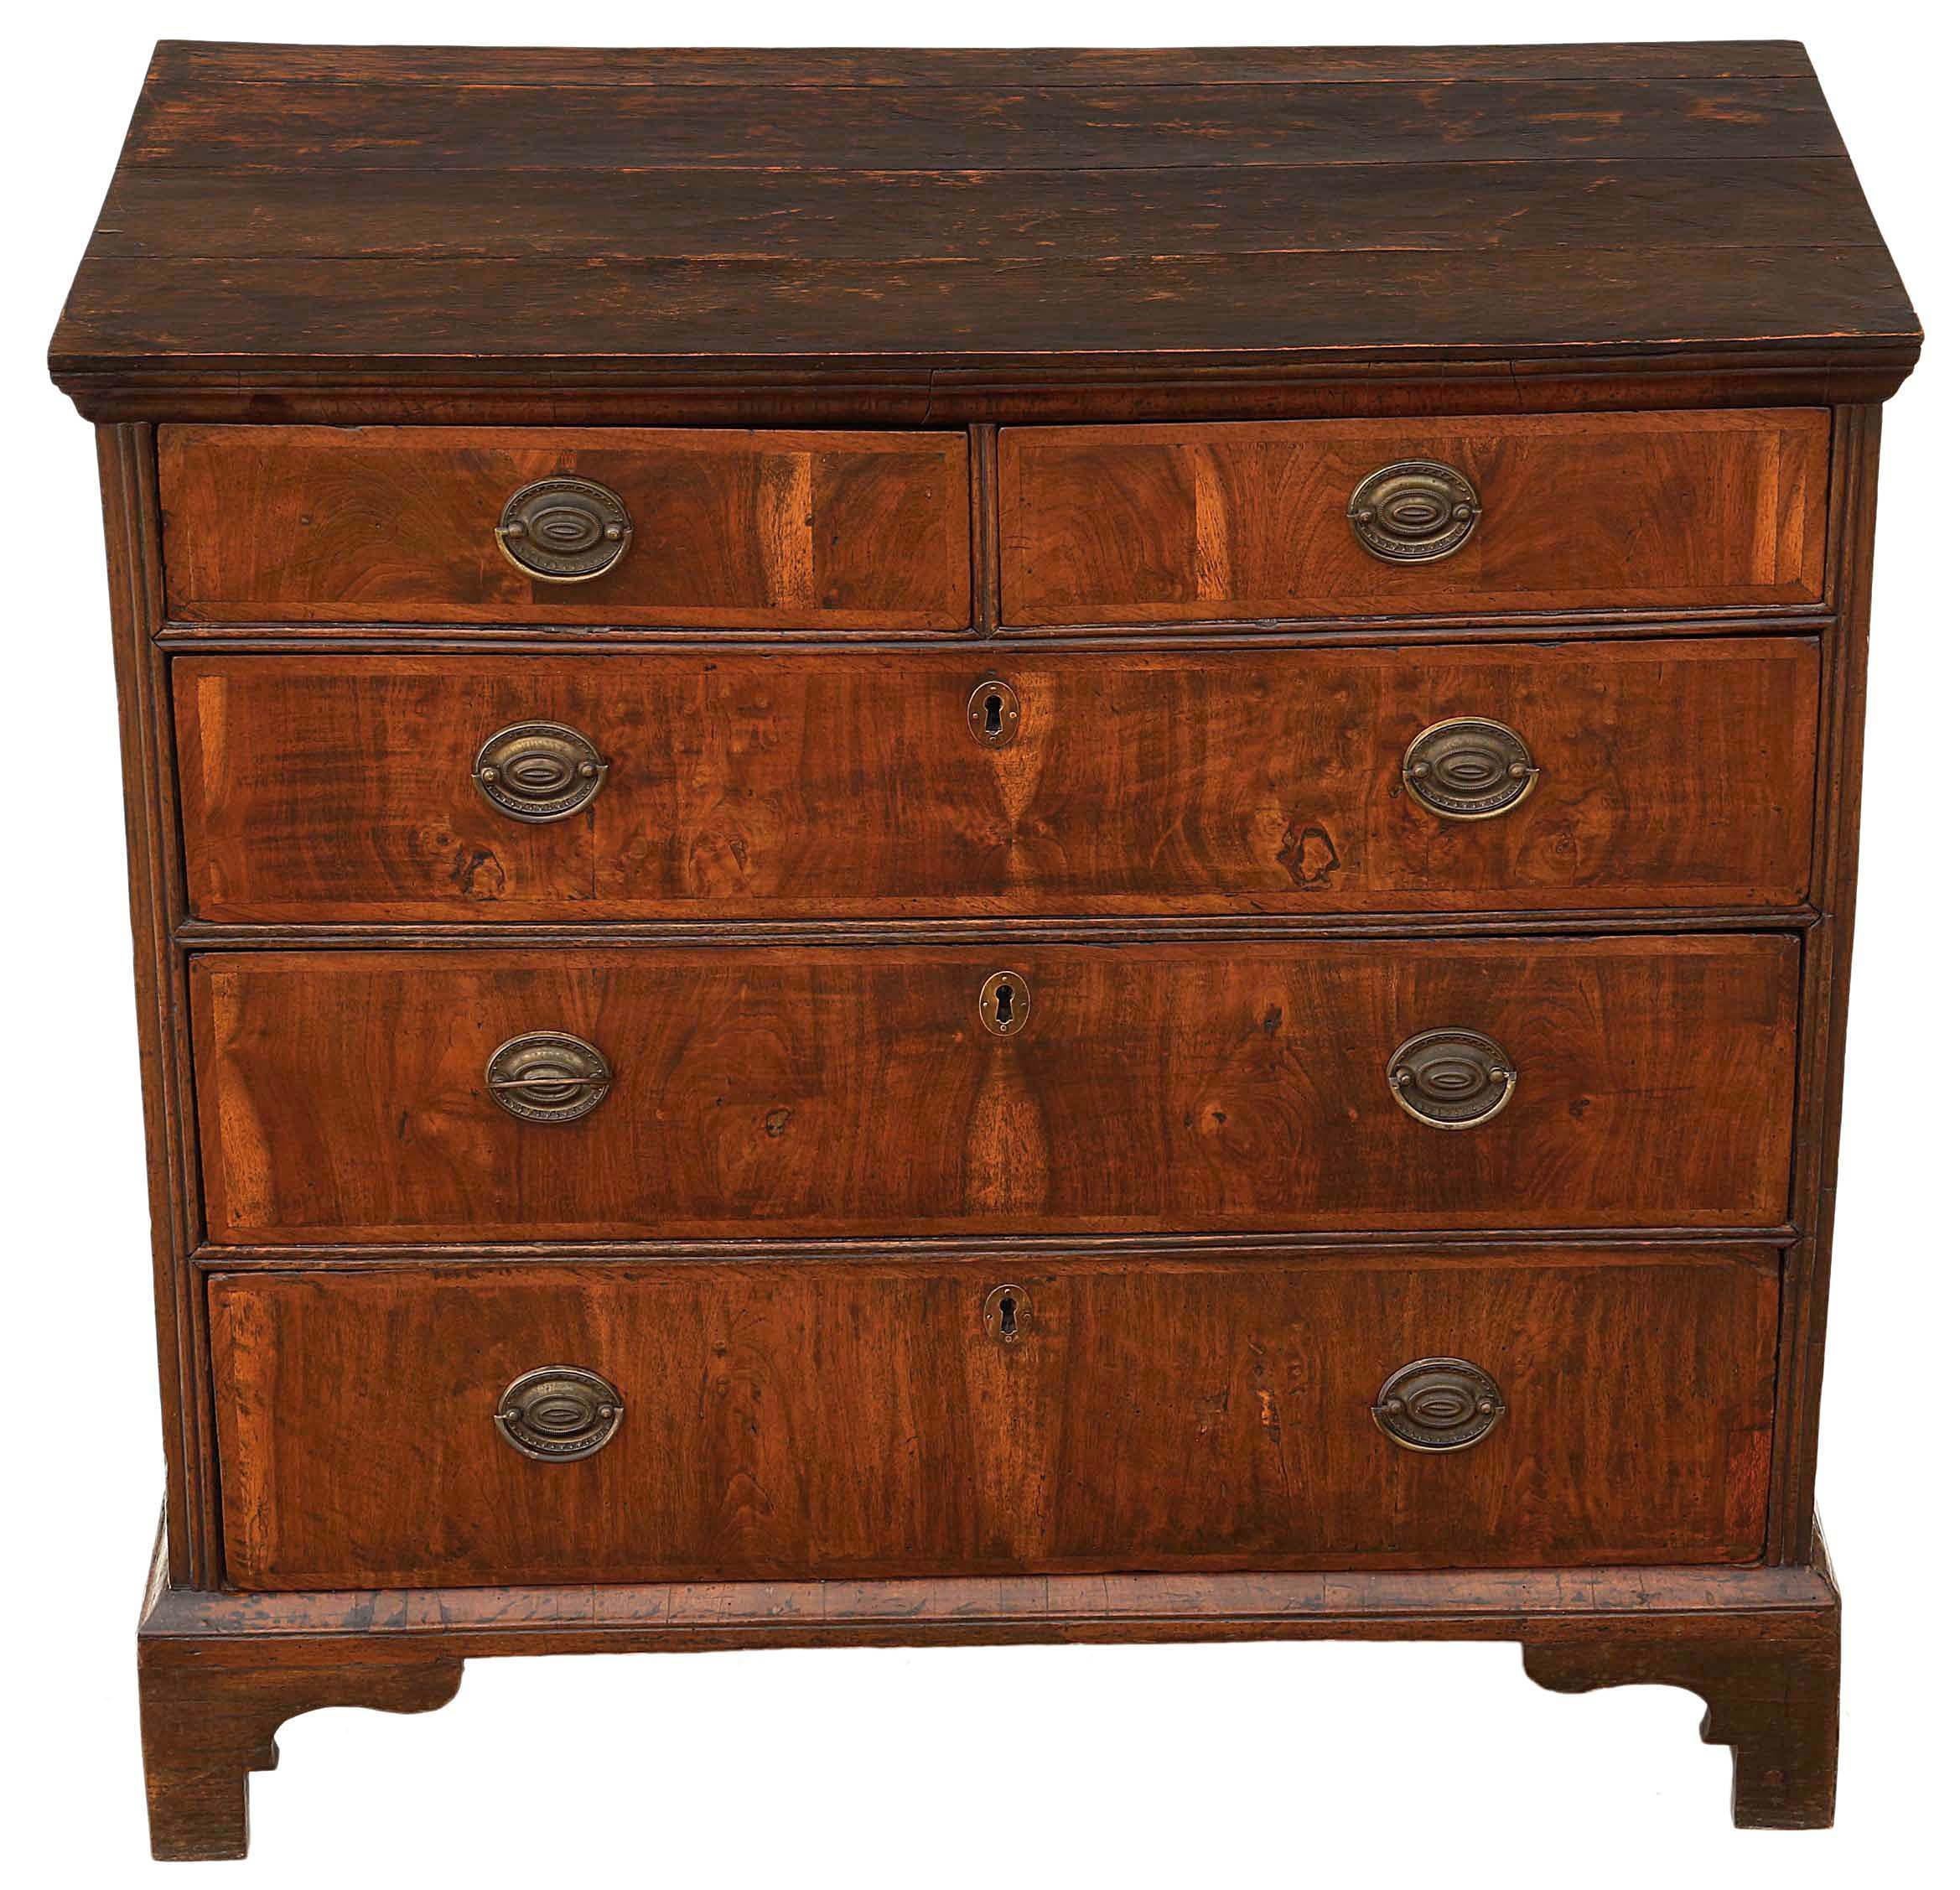 Antique Georgian chest of drawers: 18th Century and later, crossbanded walnut and oak.

Immerse yourself in the timeless allure of this exquisite antique chest of drawers, originating from the Georgian era and dating back to the 18th century.